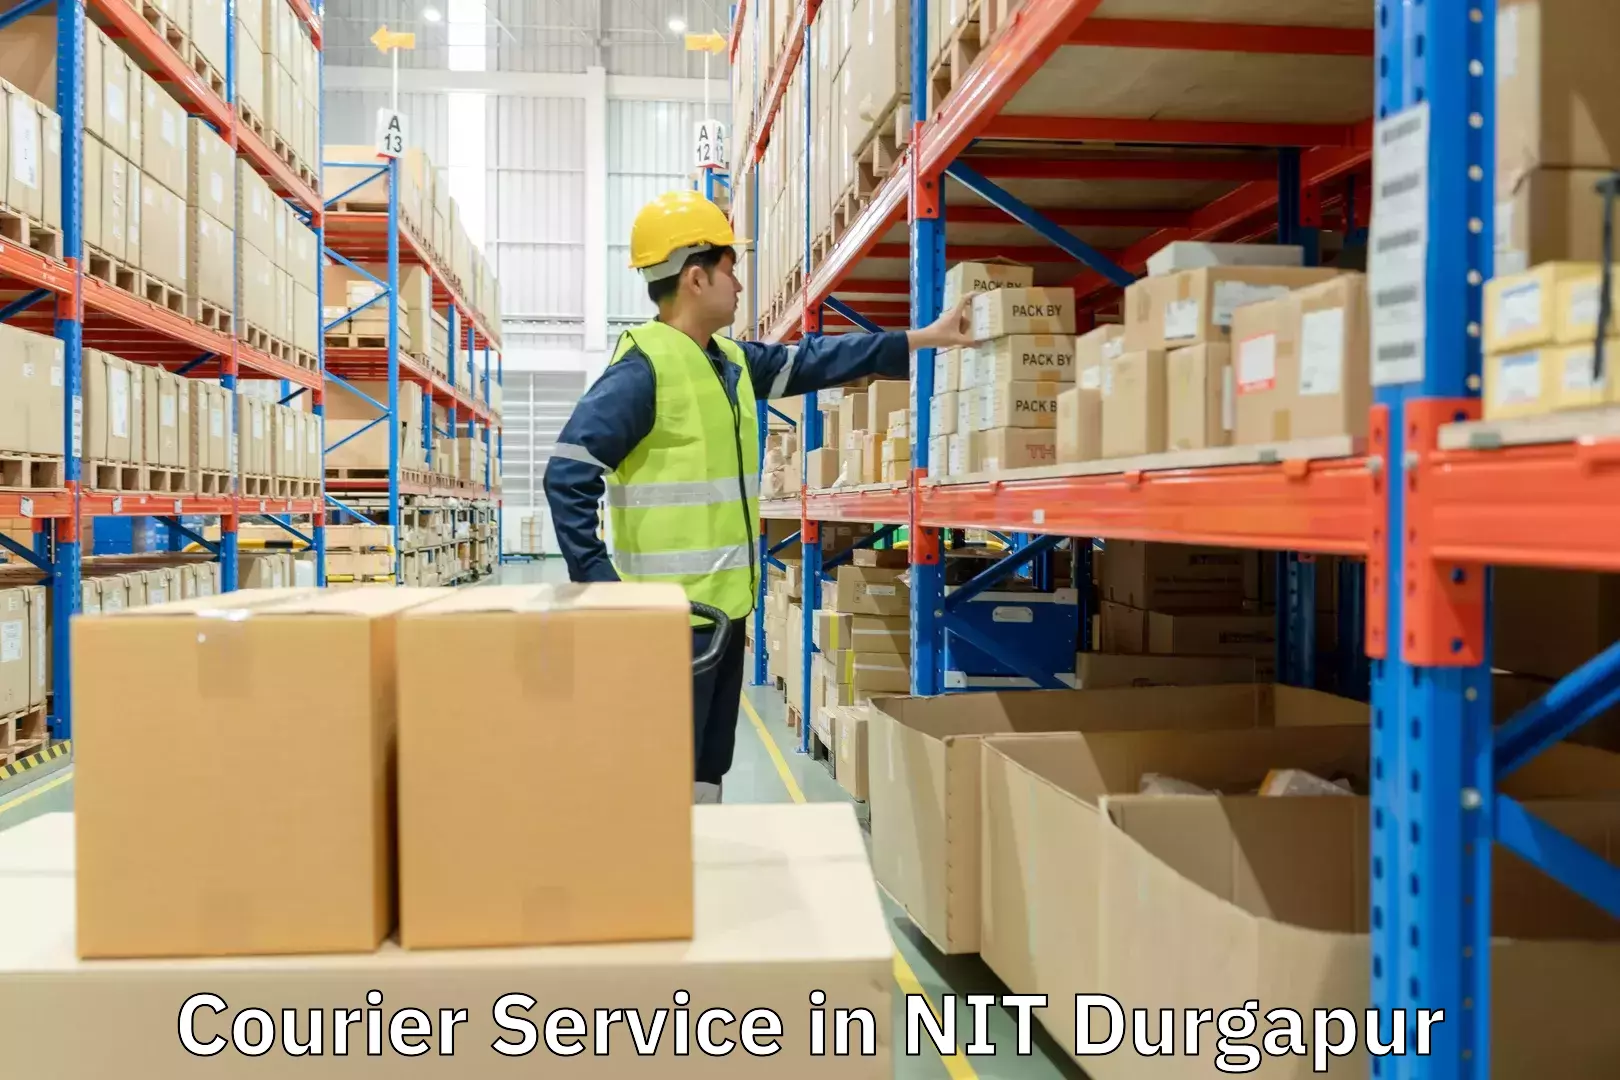 Sustainable shipping practices in NIT Durgapur